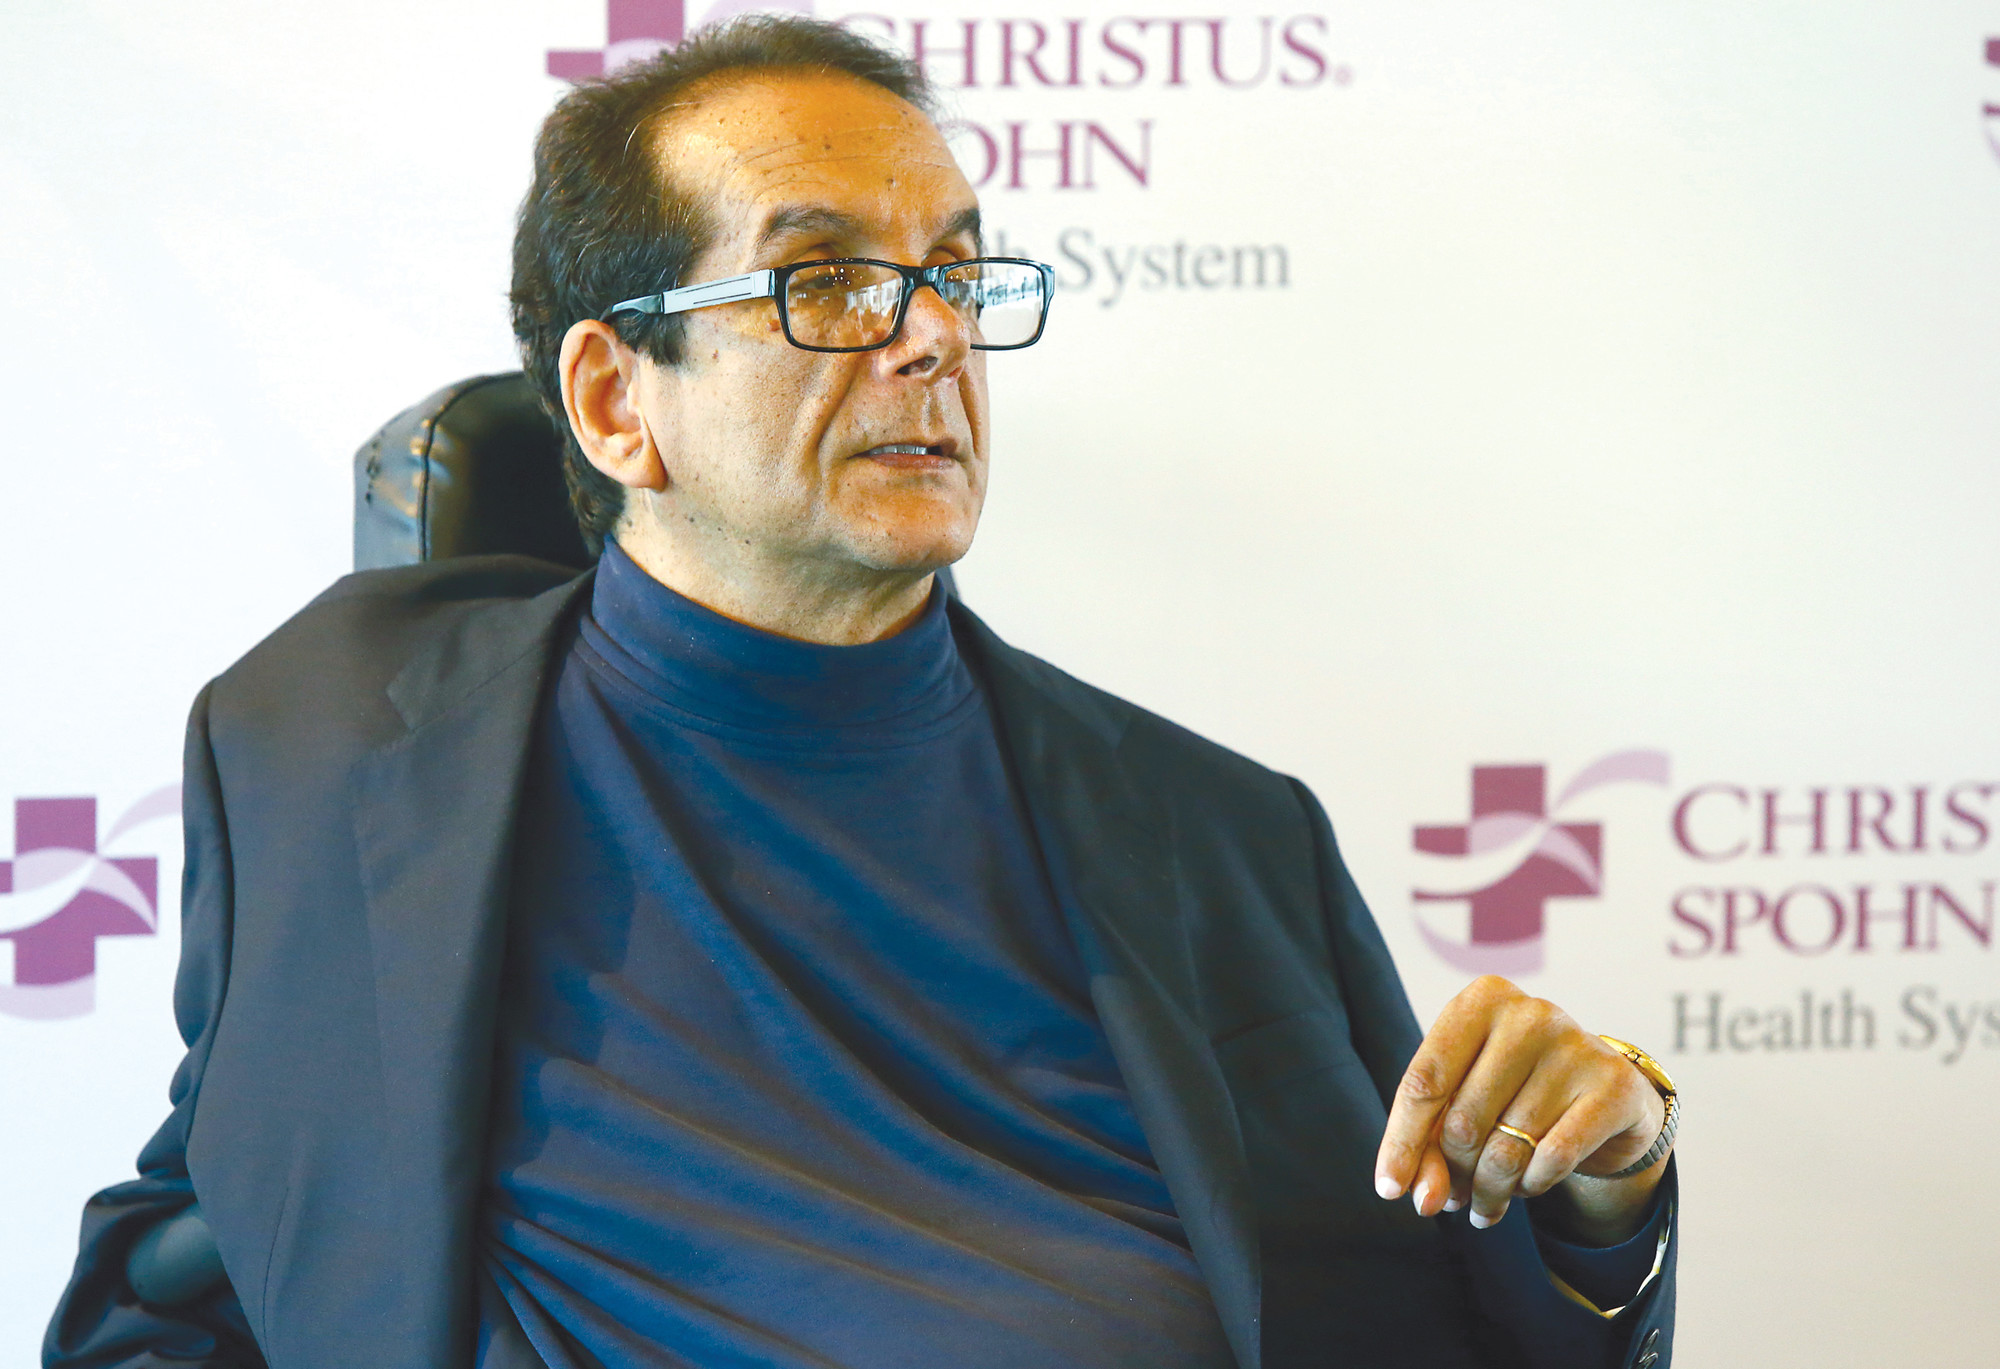 Charles Krauthammer talks about getting into politics during a news conference in Corpus Christi, Texas, in 2015. The conservative writer and pundit Krauthammer has died. His death was announced Thursday by two media organizations that employed him, Fox News Channel and The Washington Post. He was 68.